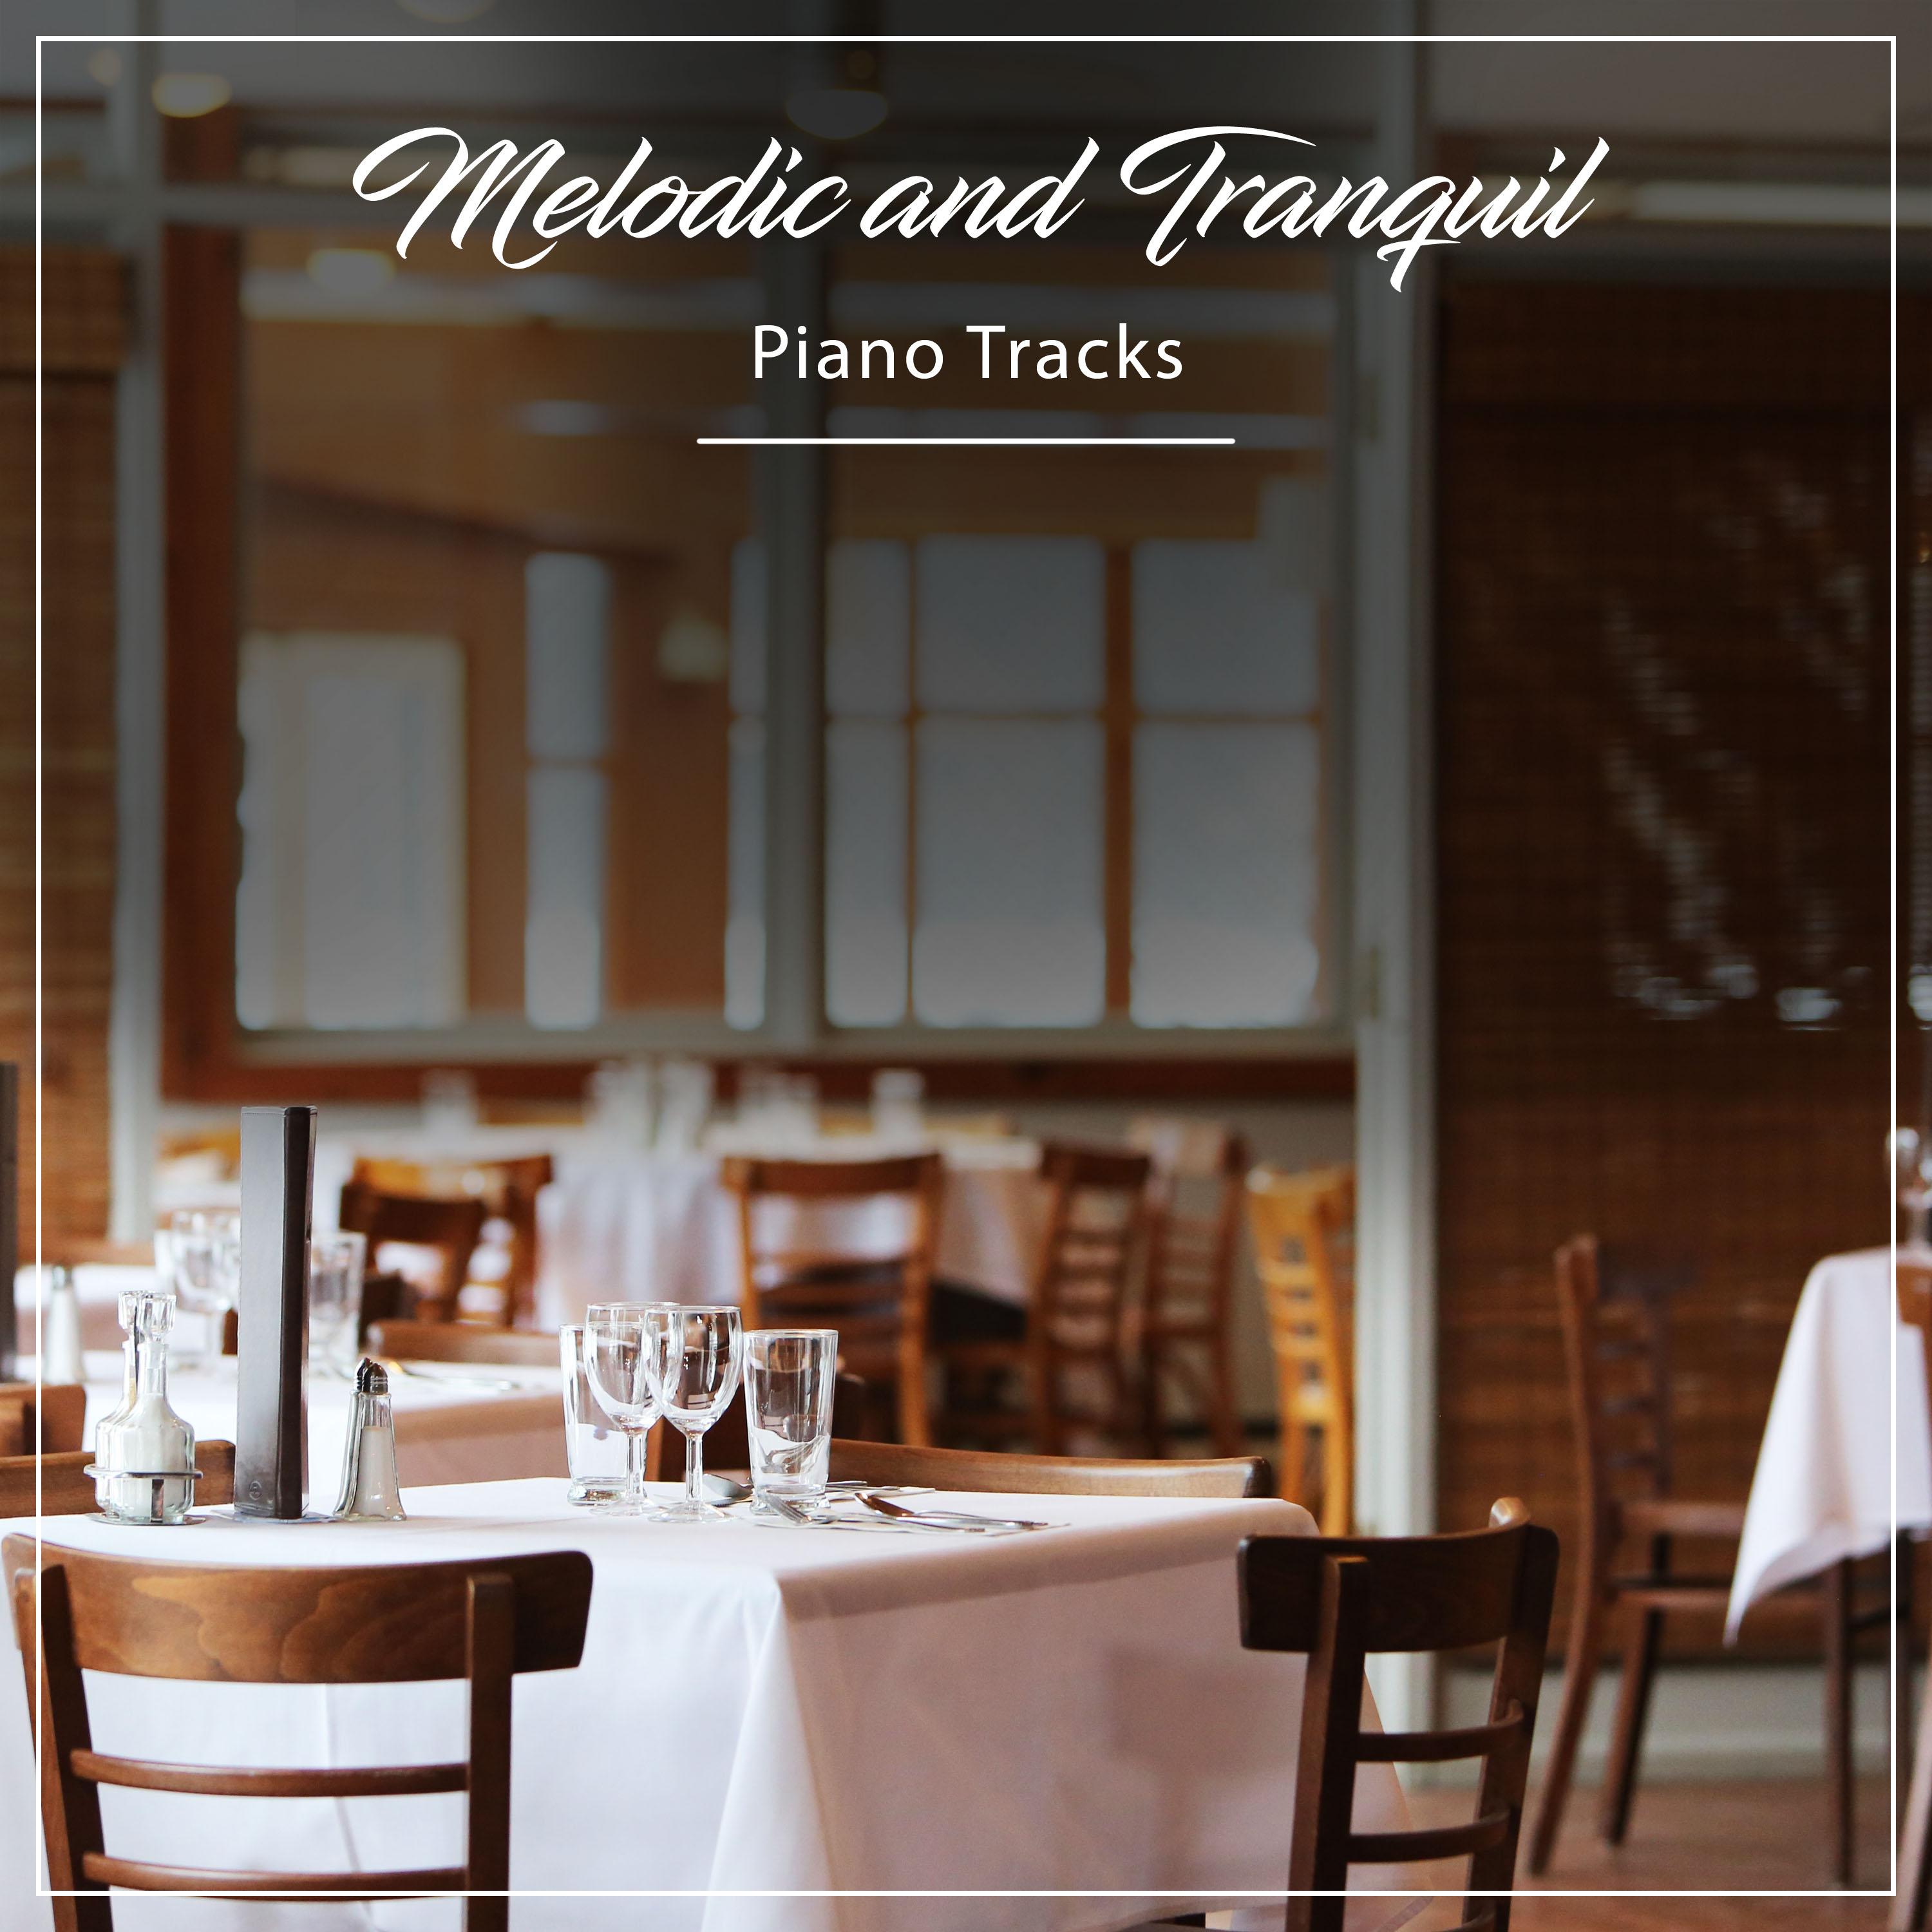 #5 Melodic and Tranquil Piano Tracks